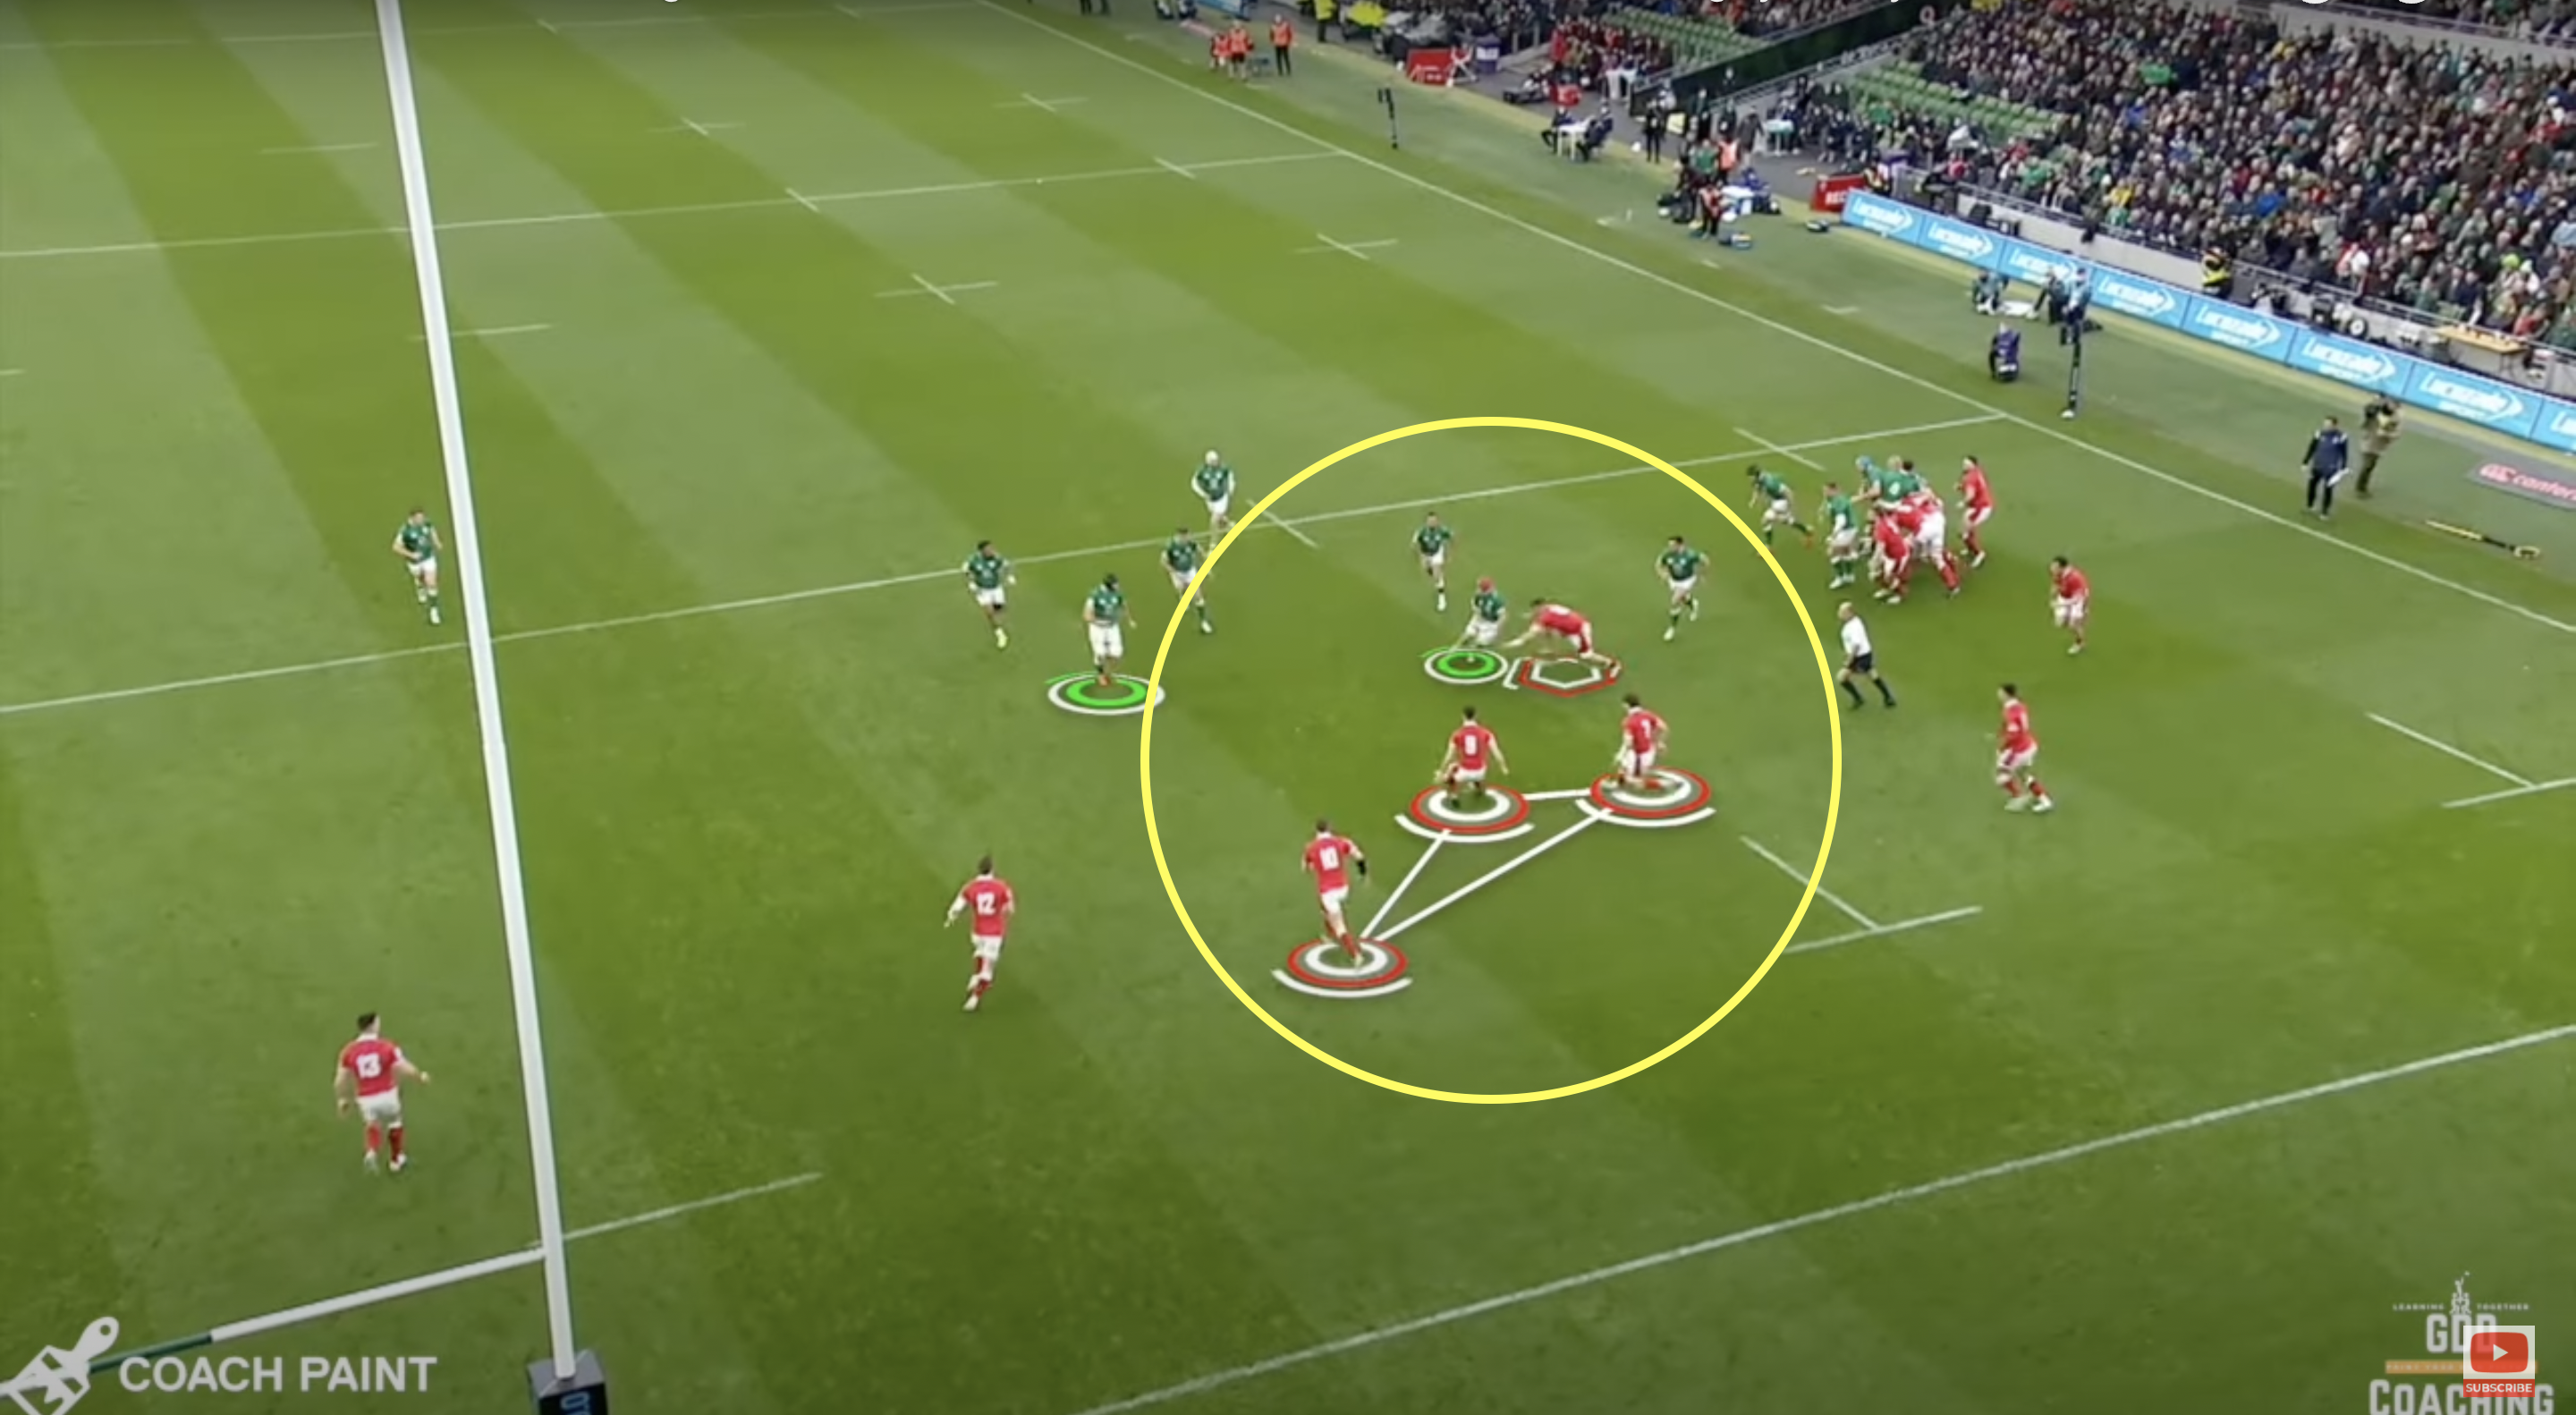 Rugby guru dissects Ireland's attacking masterclass and asks if it can win them Six Nations